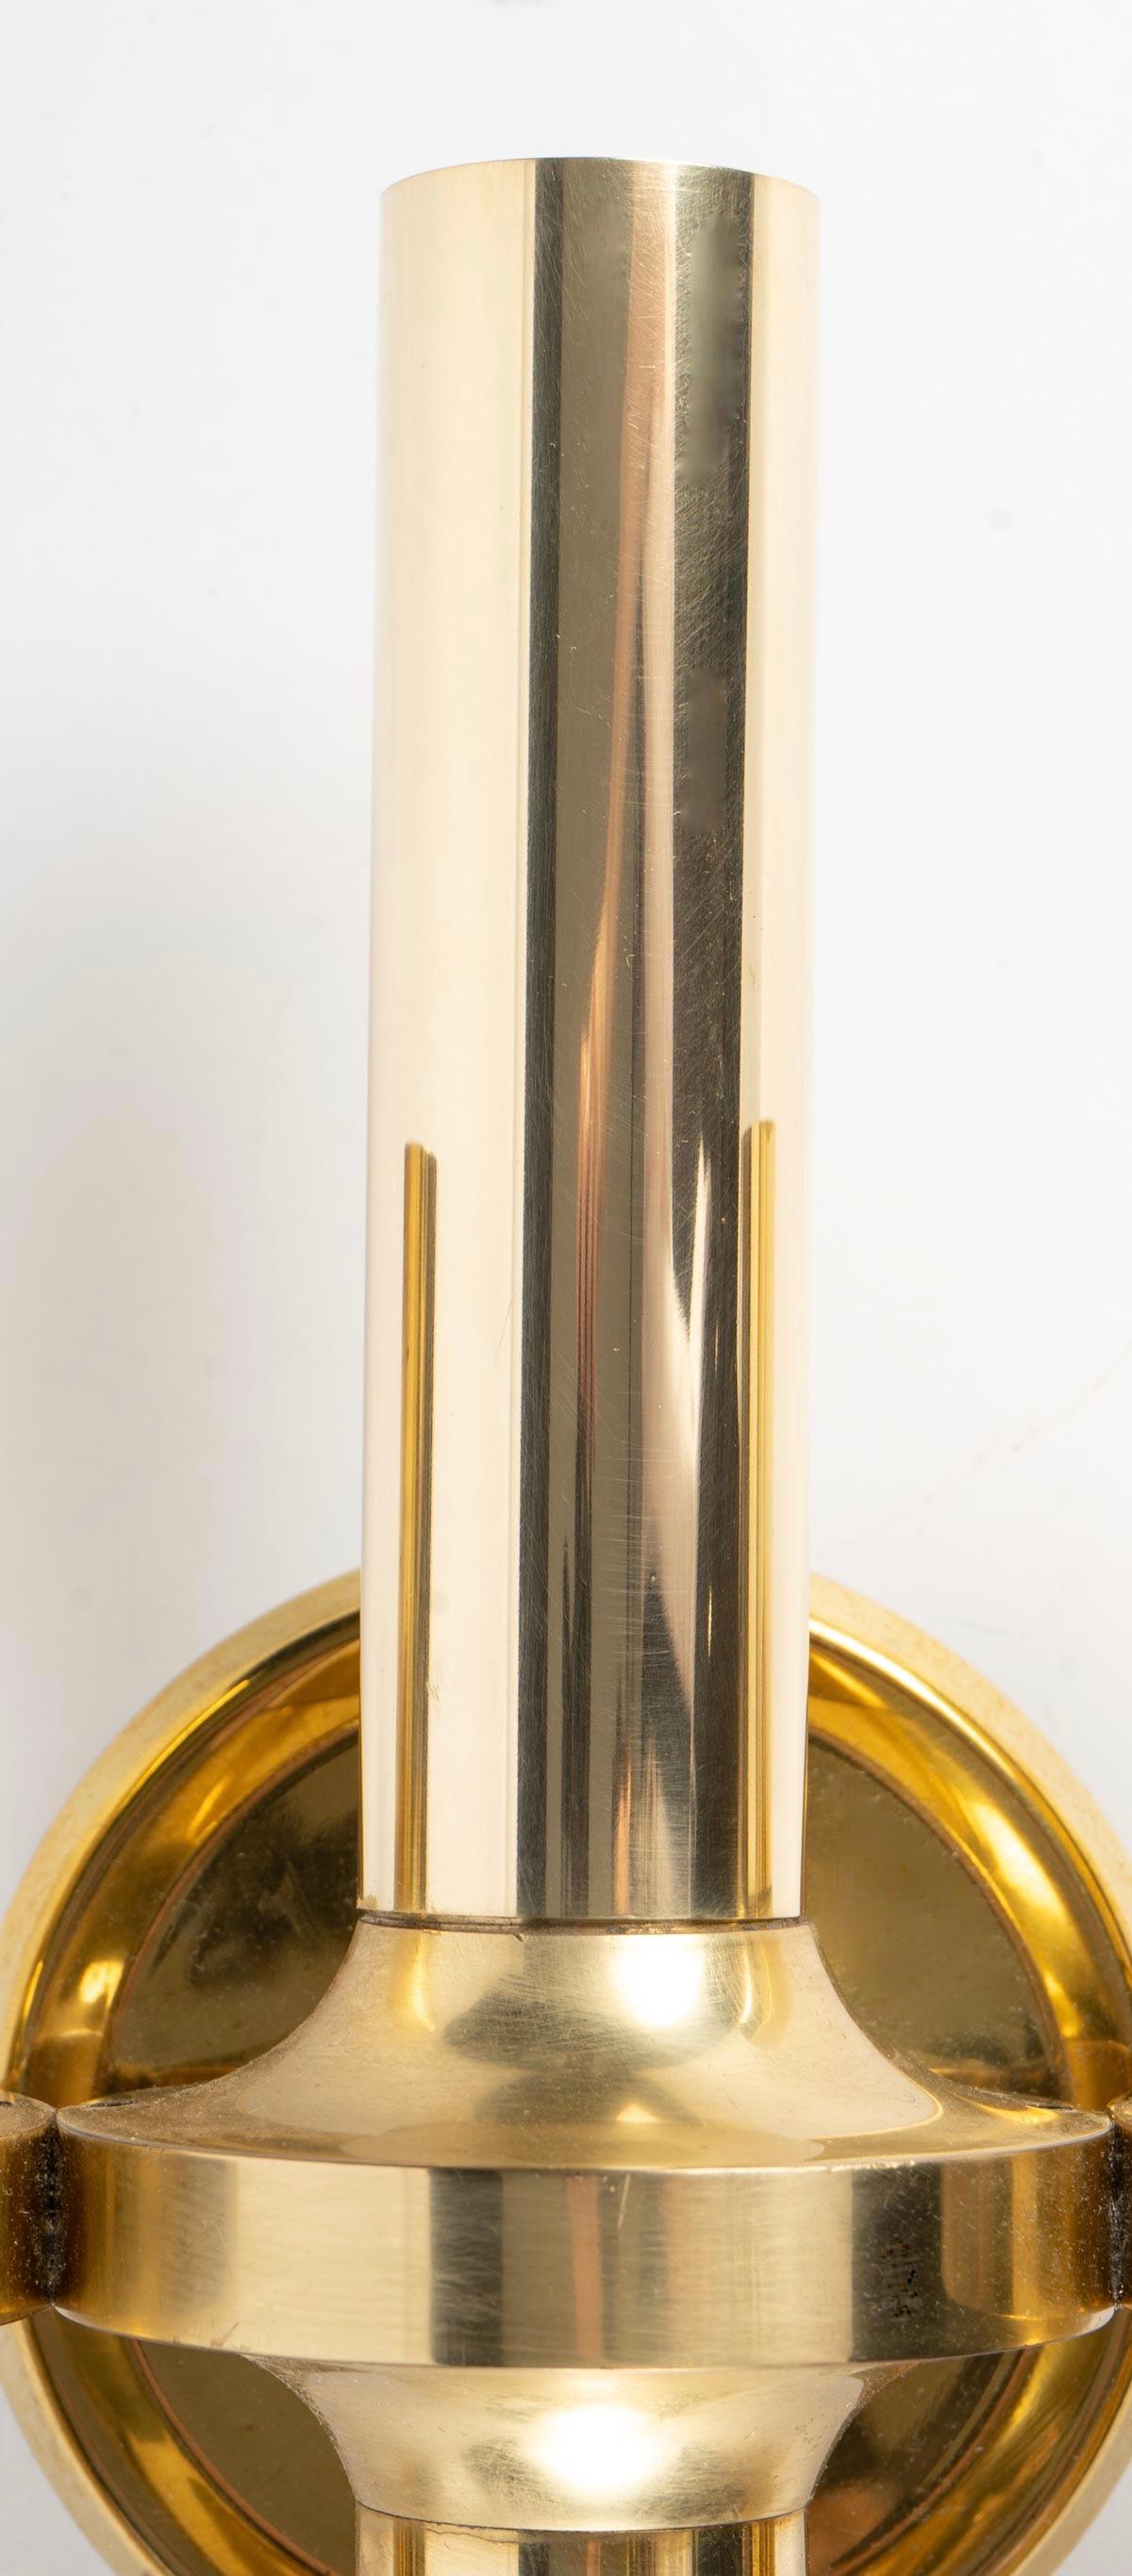 Composed of a round back plate on which is positioned three cylindrical tubes decorated with spinning tops placed in the center of each tube.
The central tube is larger than the two other tubes placed on each side of the sconce.
The 3 tubes receive